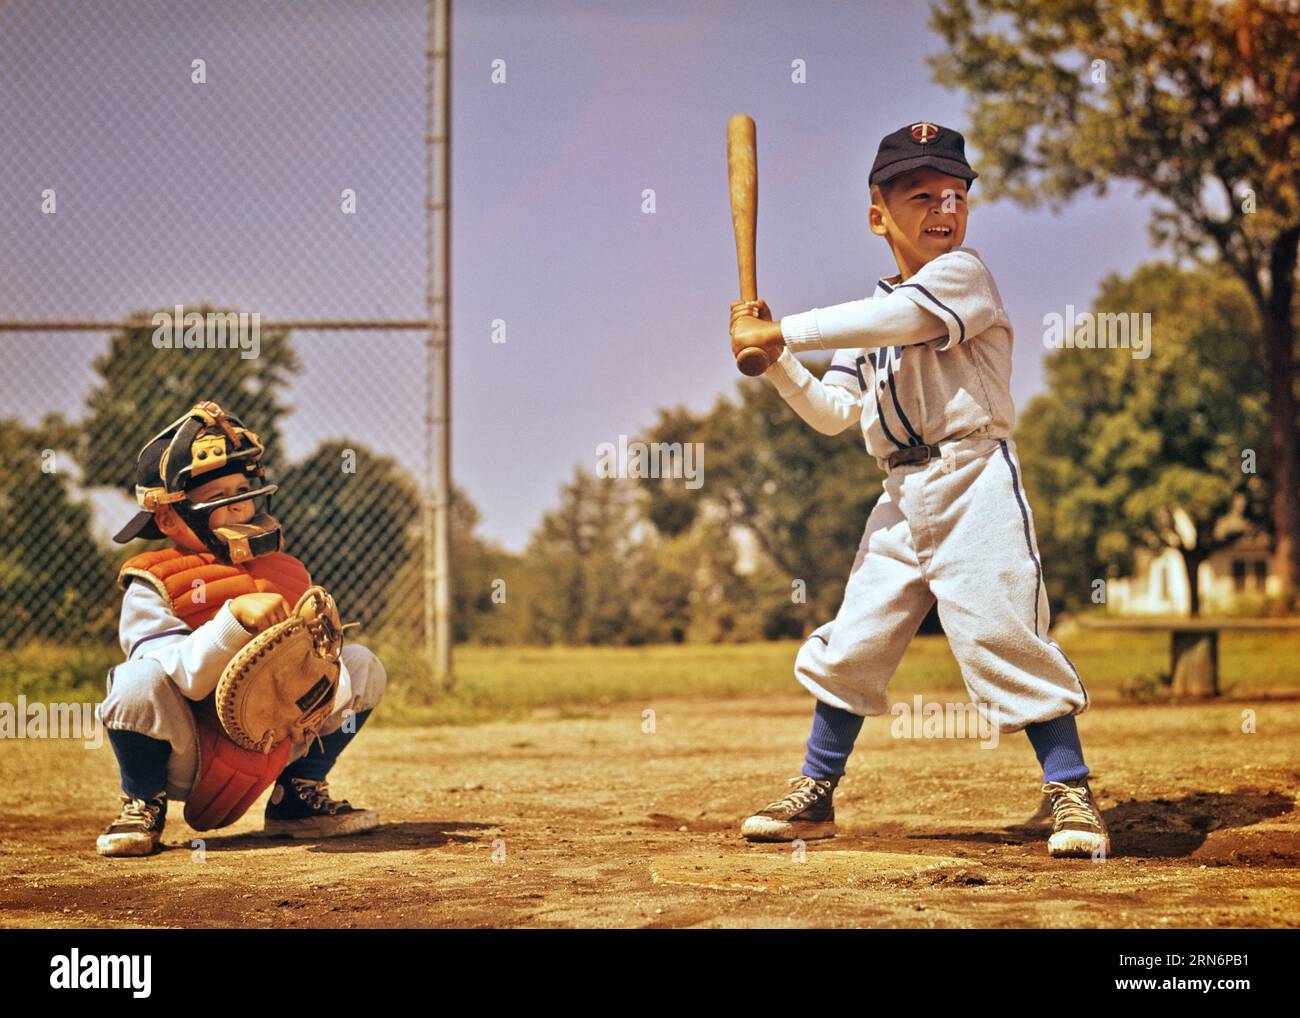 1960s LITTLE LEAGUE BASEBALL GAME BOY AT BAT AND CATCHER READY BEHIND HOME PLATE - kj1585 GRD001 HARS FULL-LENGTH INSPIRATION MALES ATHLETIC ACTIVITY PHYSICAL LITTLE LEAGUE STRENGTH CATCHER AND EXCITEMENT RECREATION PRIDE UNIFORMS ATHLETES FLEXIBILITY MUSCLES BALL GAME BALL SPORT COOPERATION GROWTH JUVENILES BASEBALL BAT CAUCASIAN ETHNICITY OLD FASHIONED Stock Photo